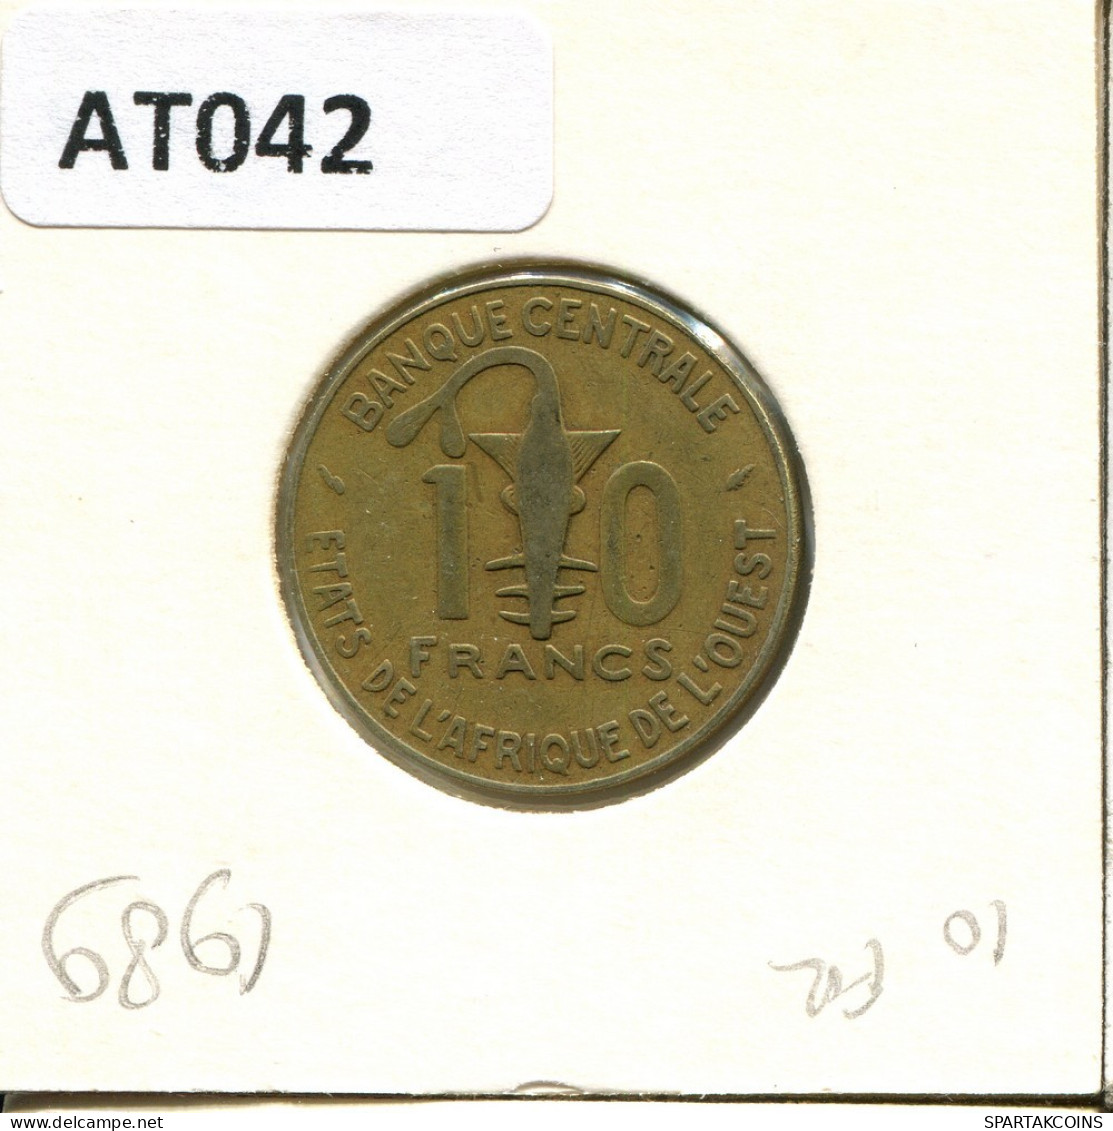 10 FRANCS CFA 1989 Western African States (BCEAO) Coin #AT042.U.A - Other - Africa